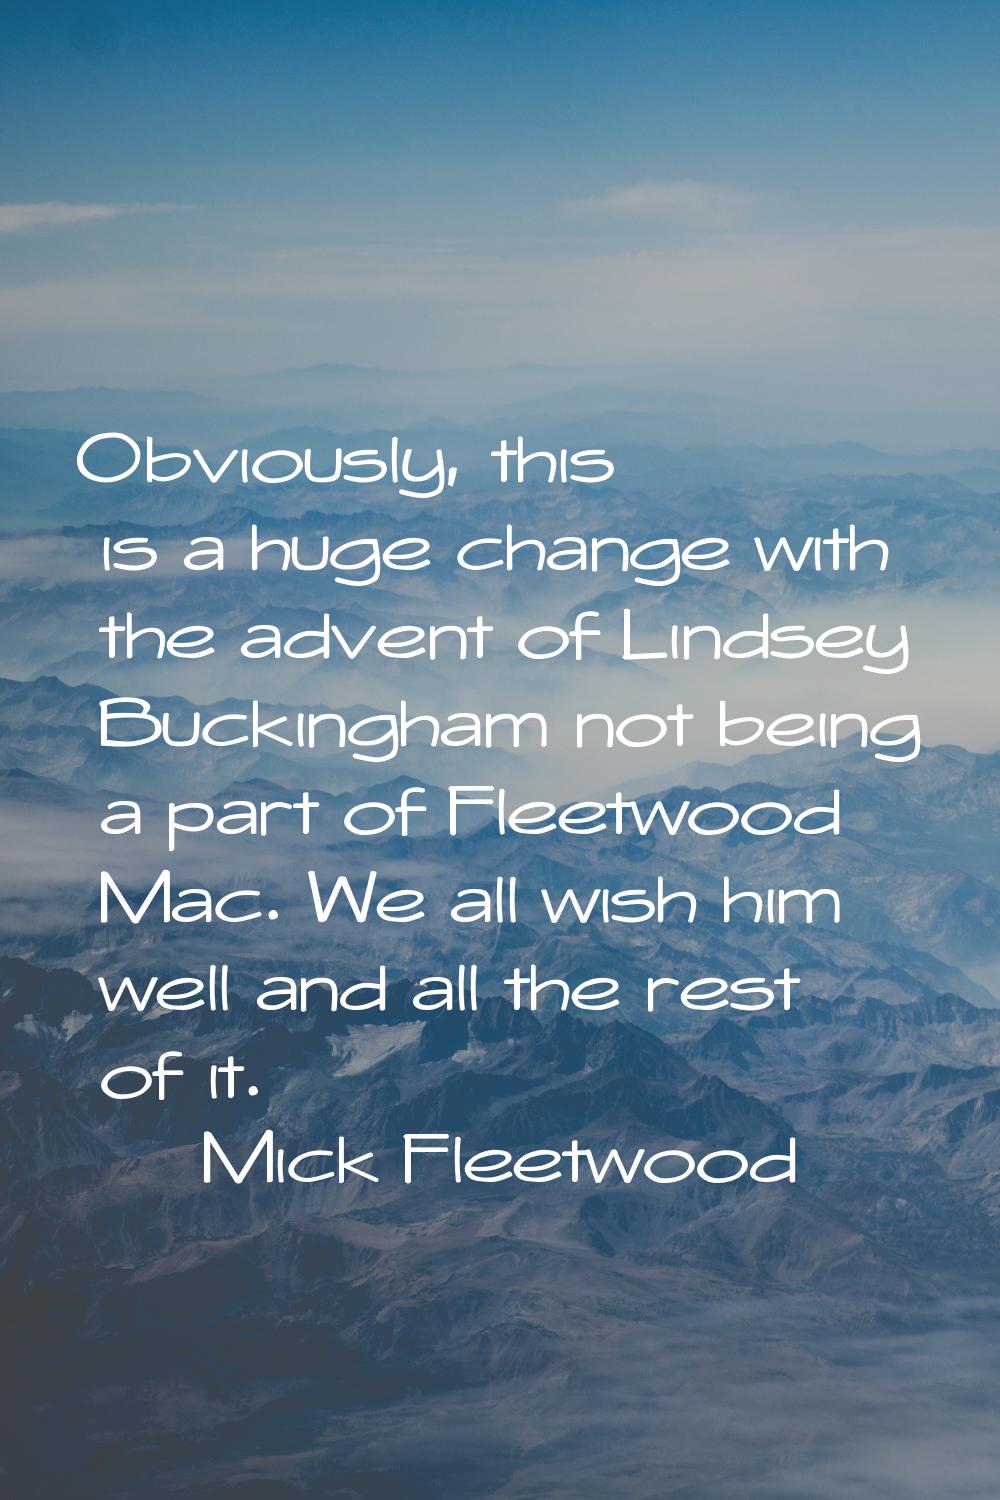 Obviously, this is a huge change with the advent of Lindsey Buckingham not being a part of Fleetwoo